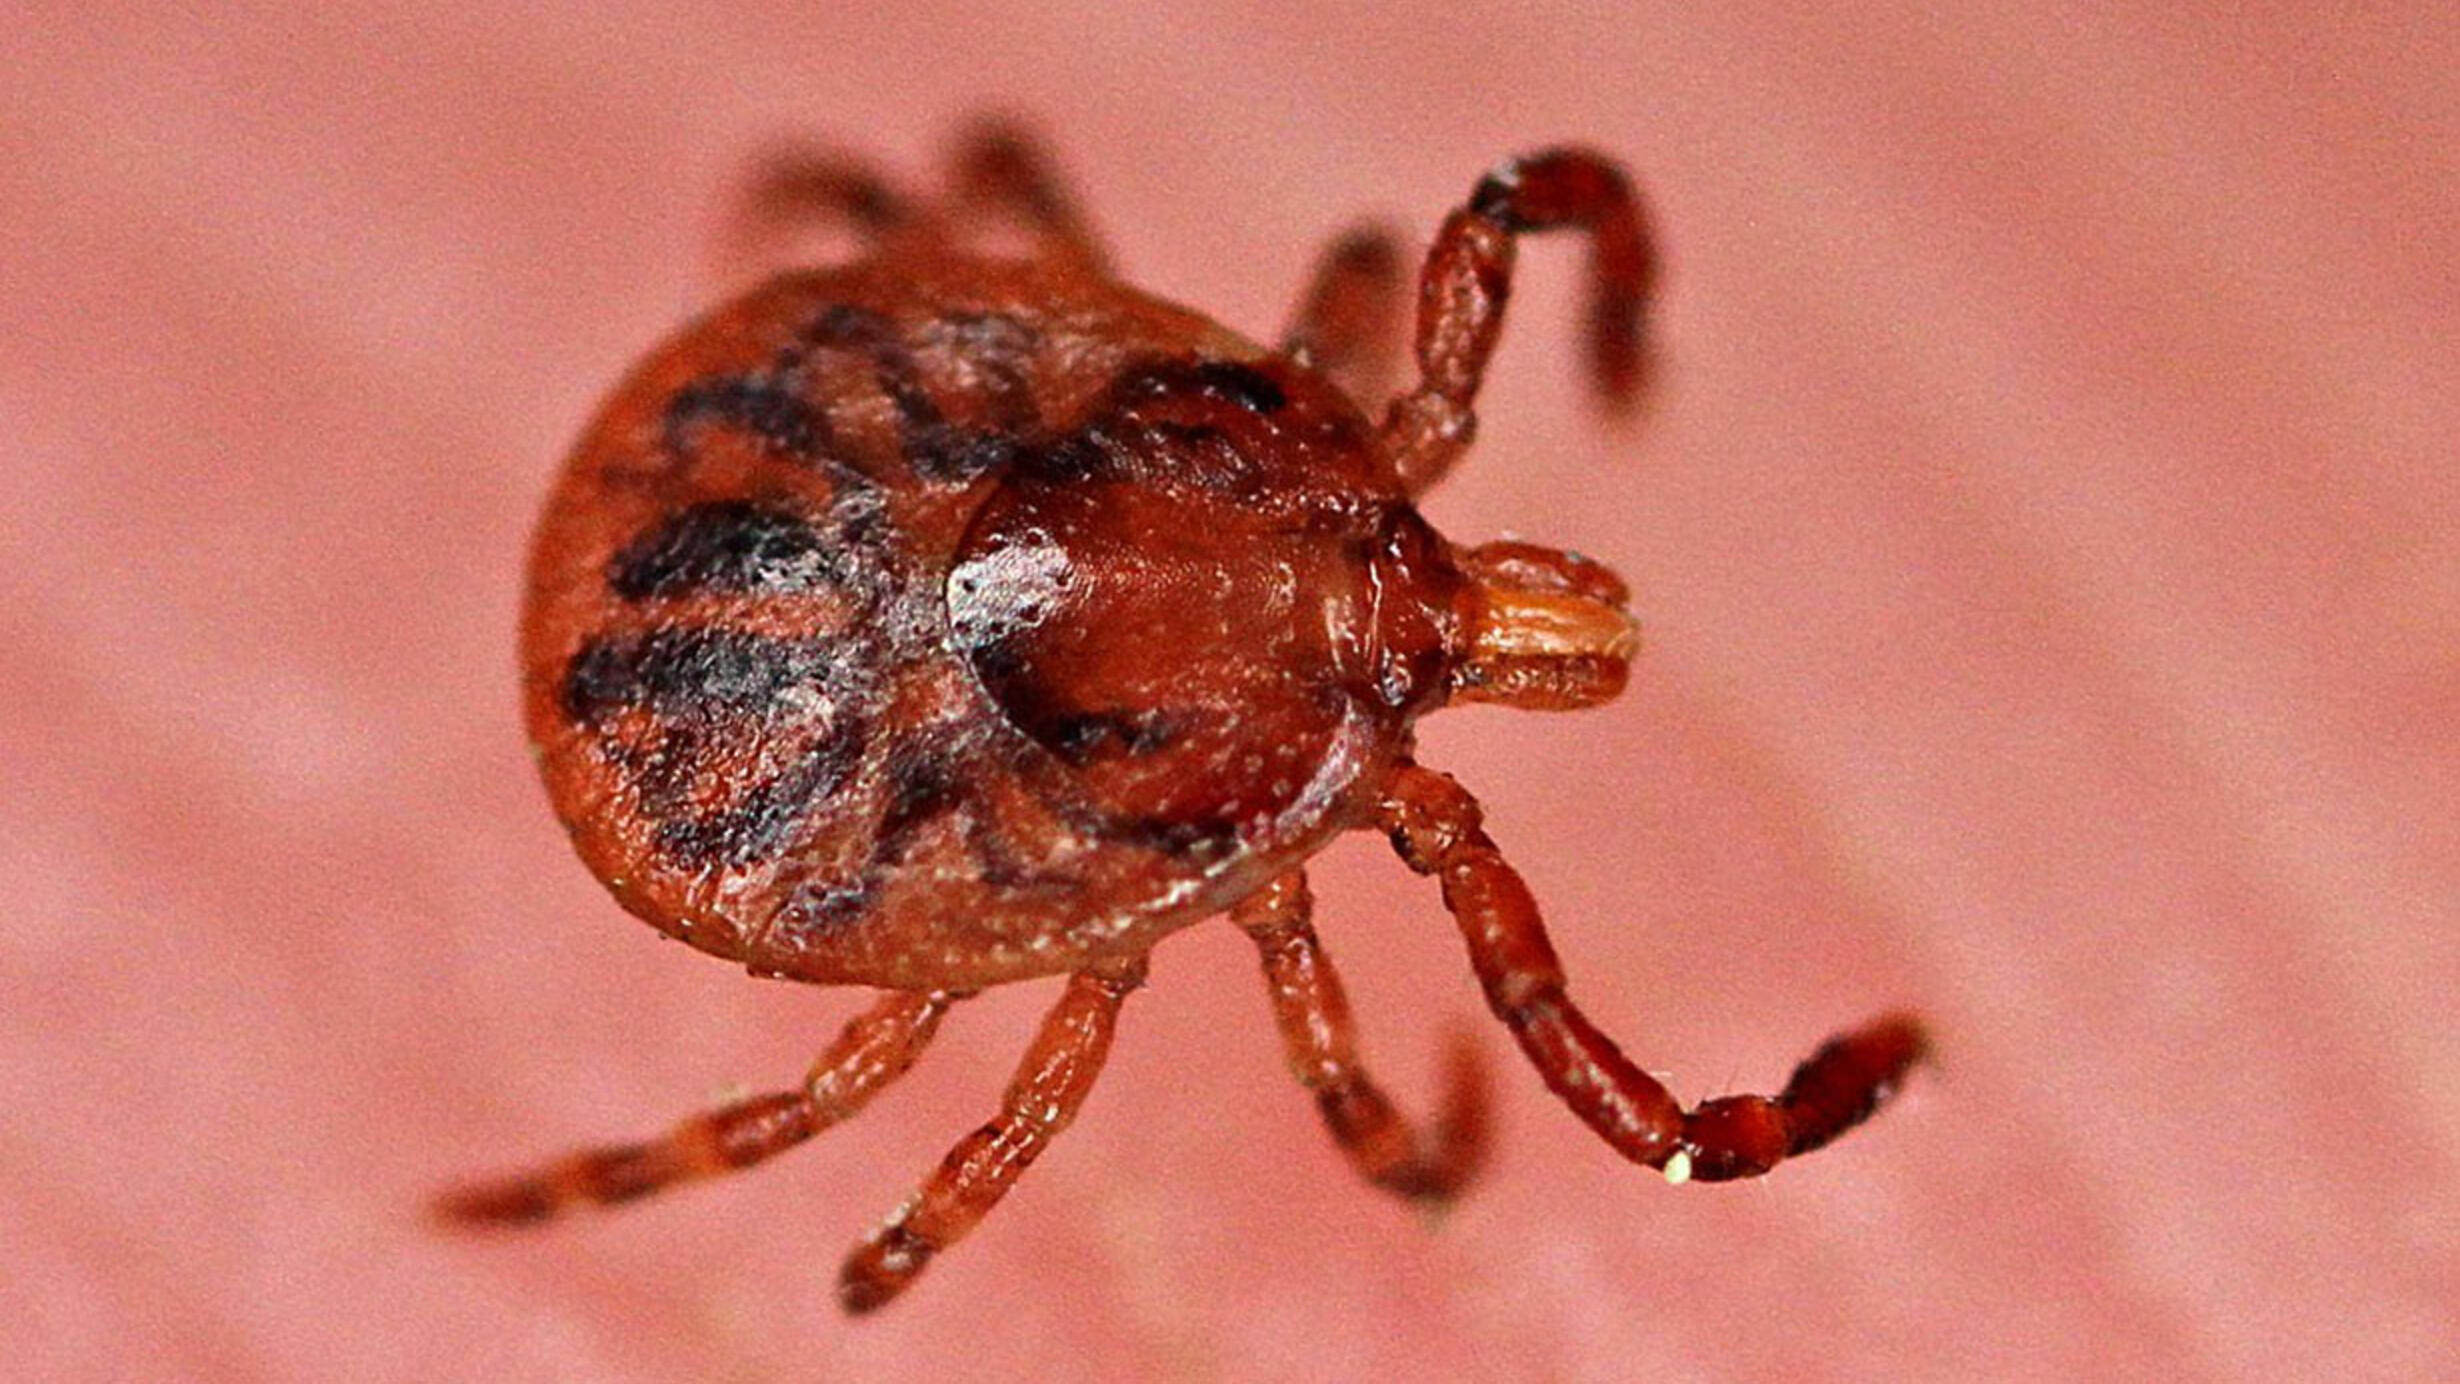 A close-up shot of a deer tick part of arachnid family with eight legs seen sitting on the palm of a hand. 